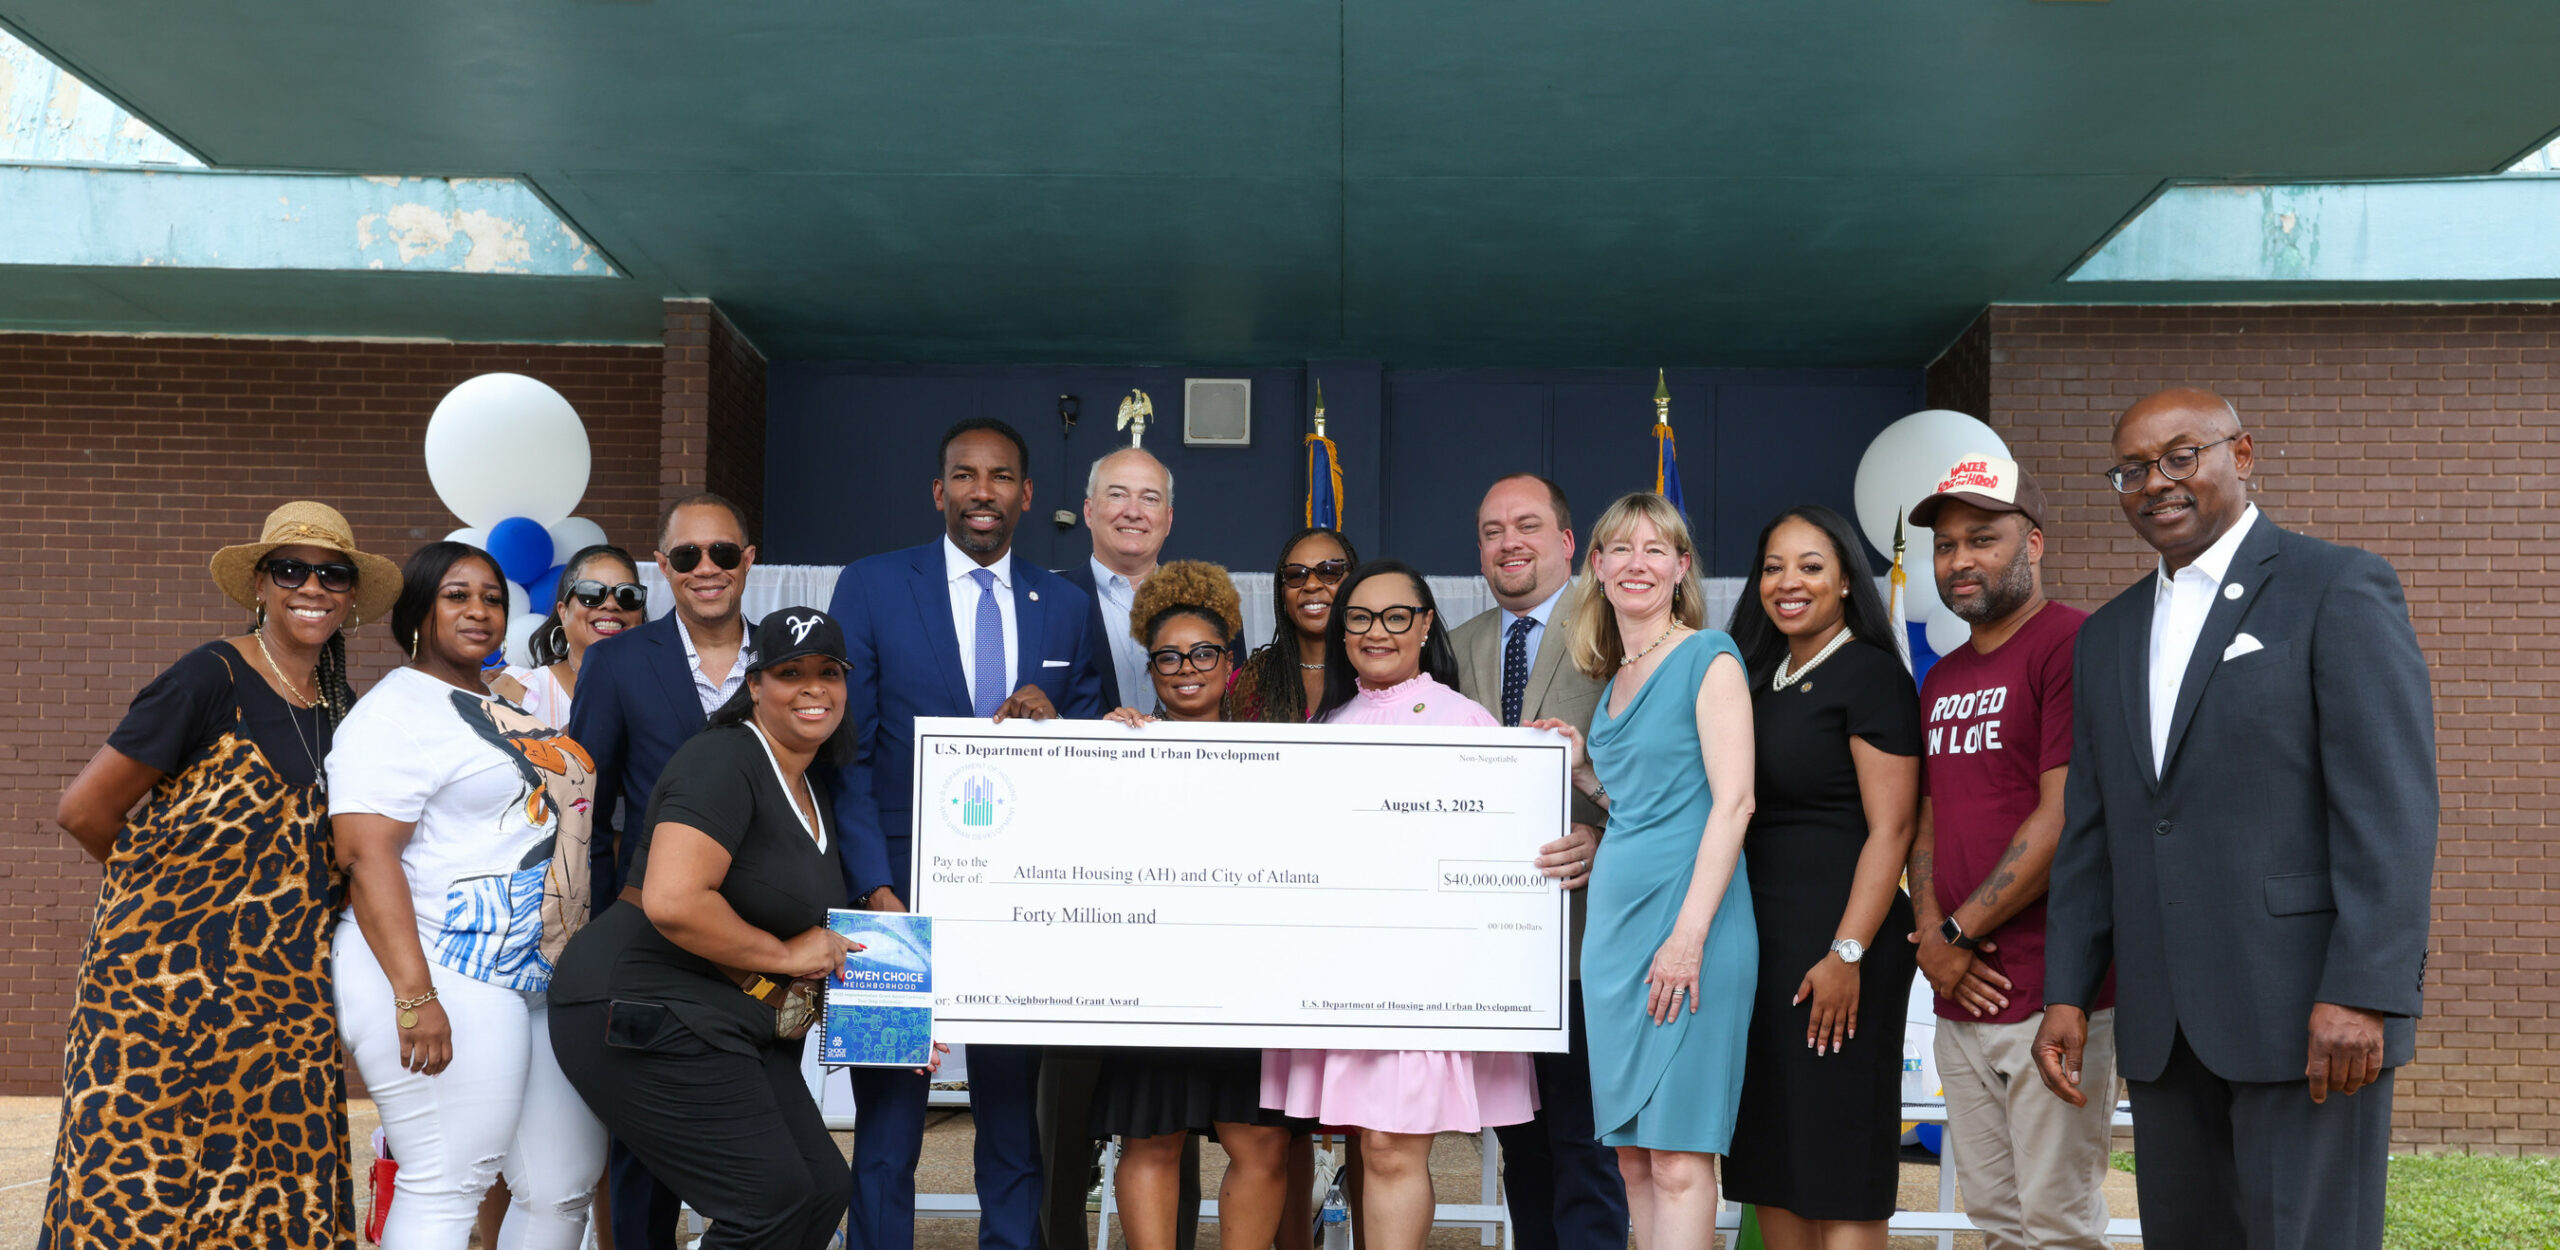 Atlanta presented with 40 Million from HUD for Bowen transformation